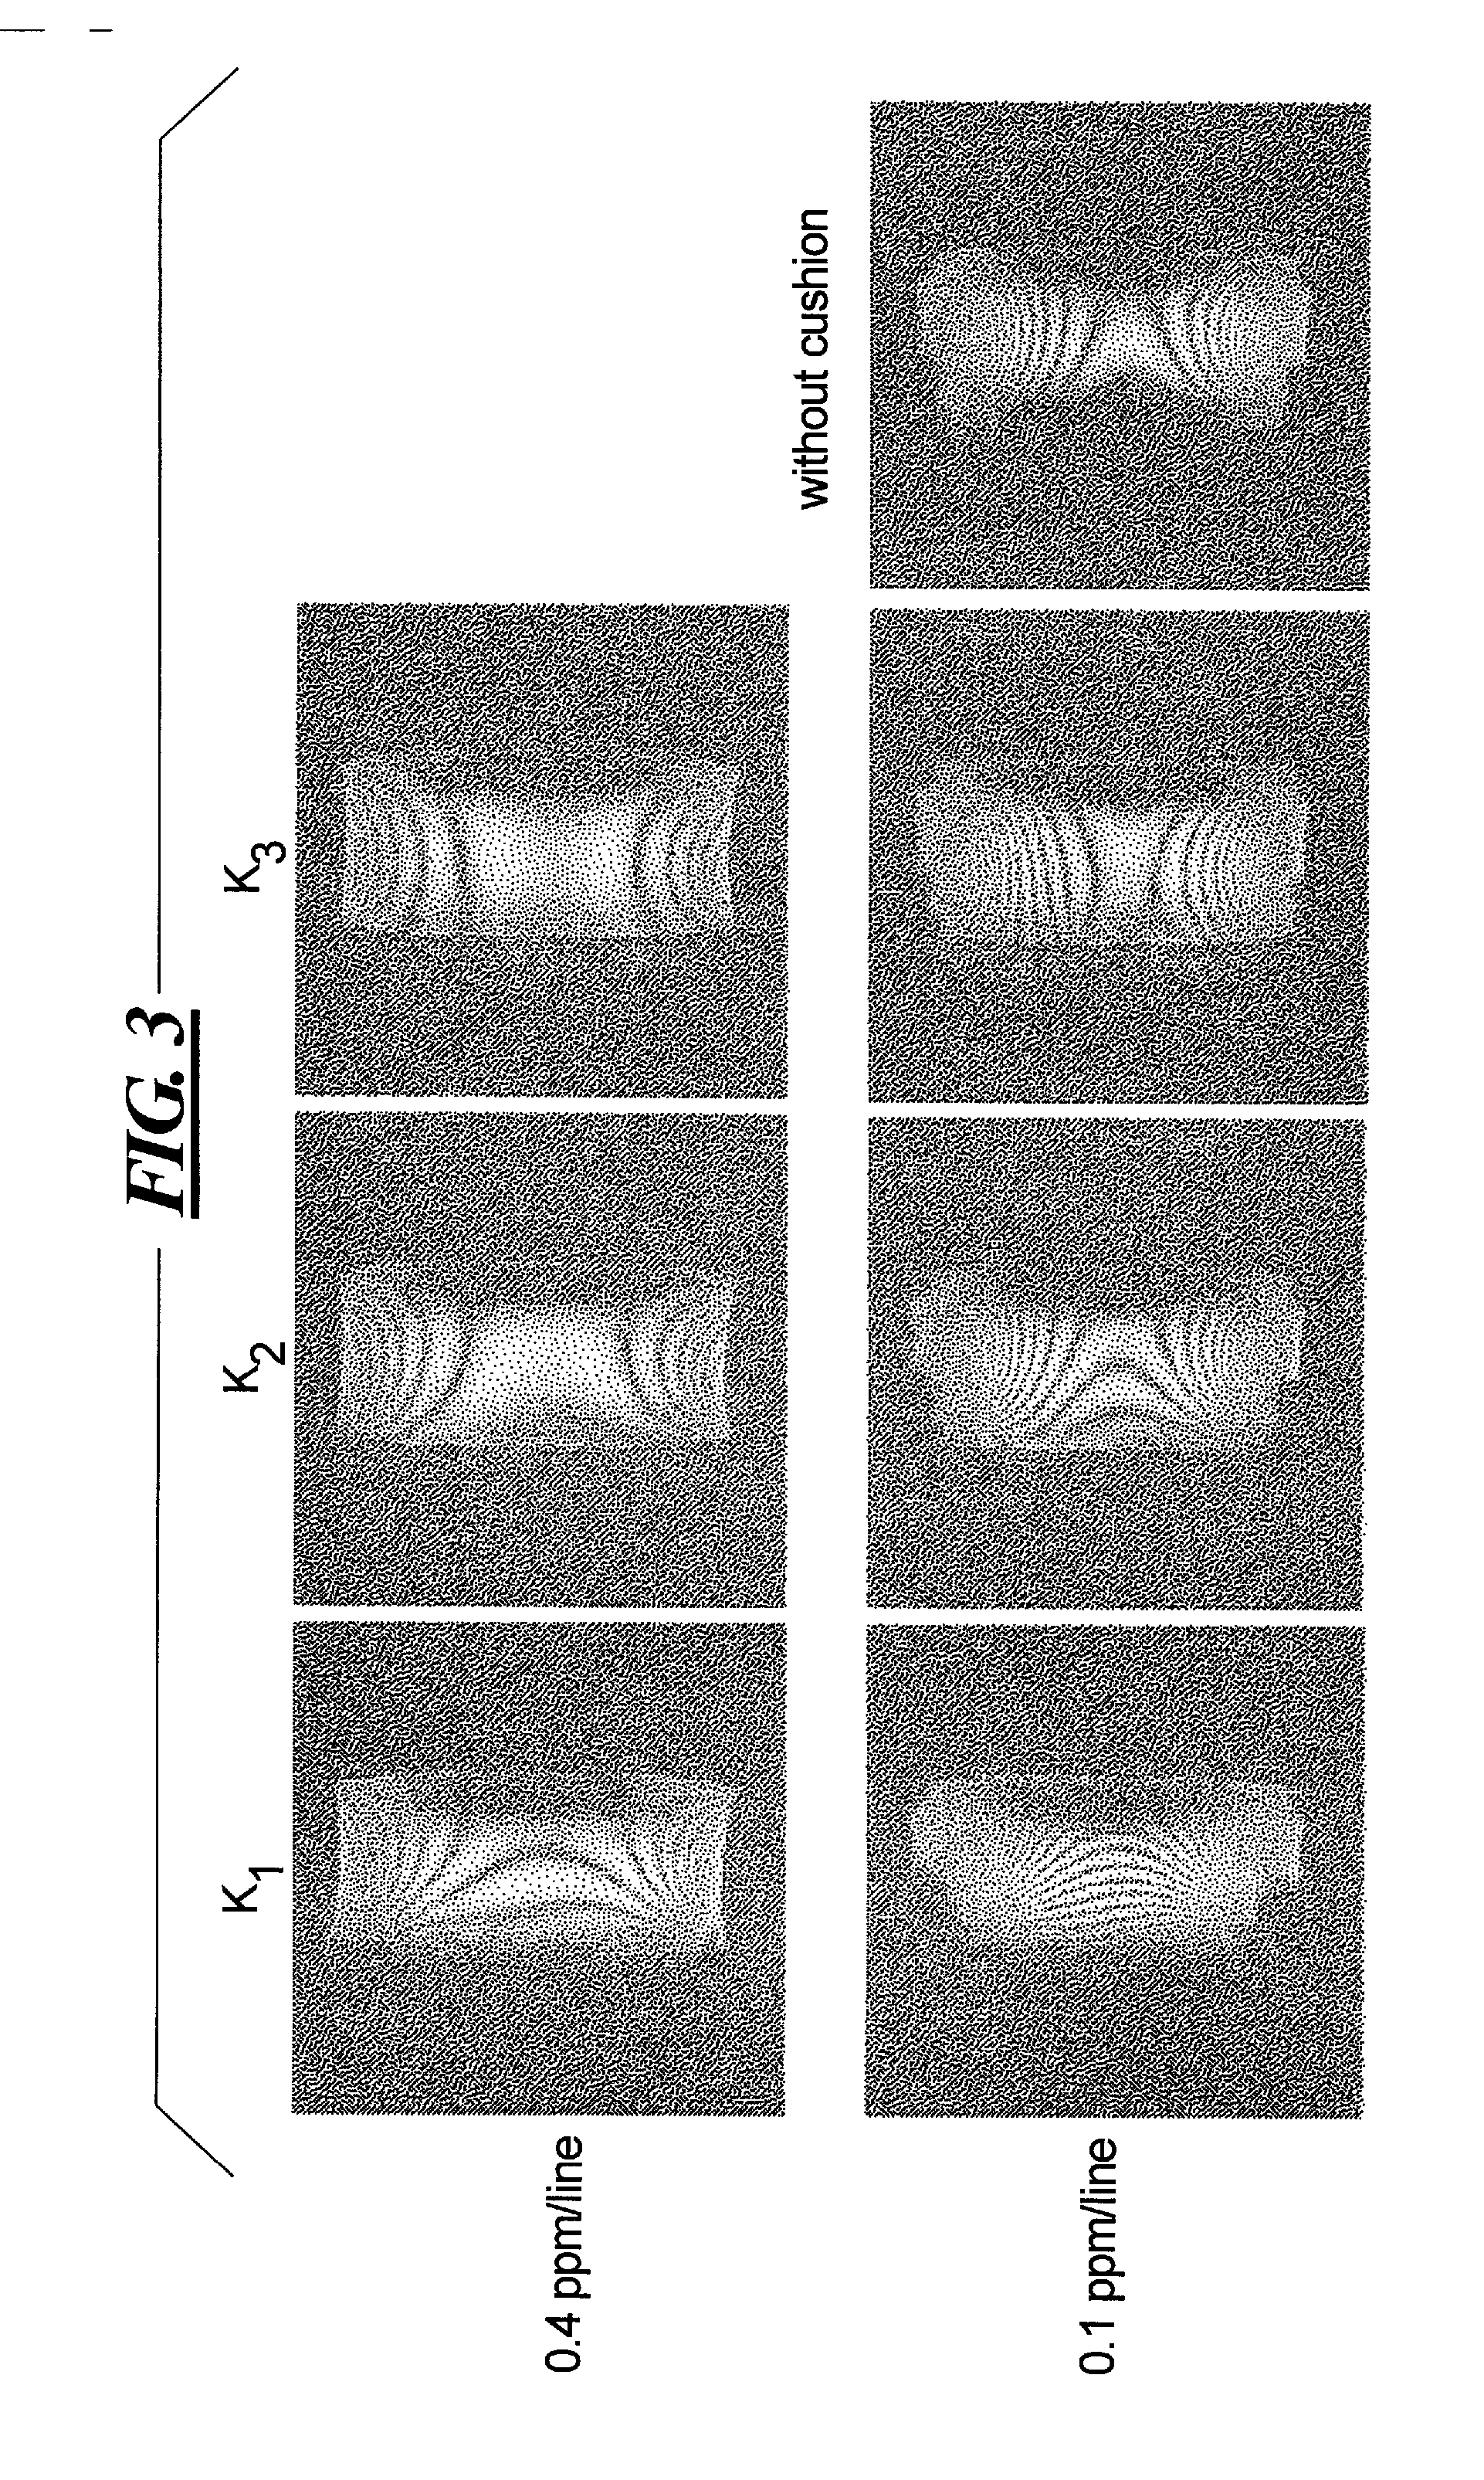 Dielectric element, and magnetic resonance imaging method using same